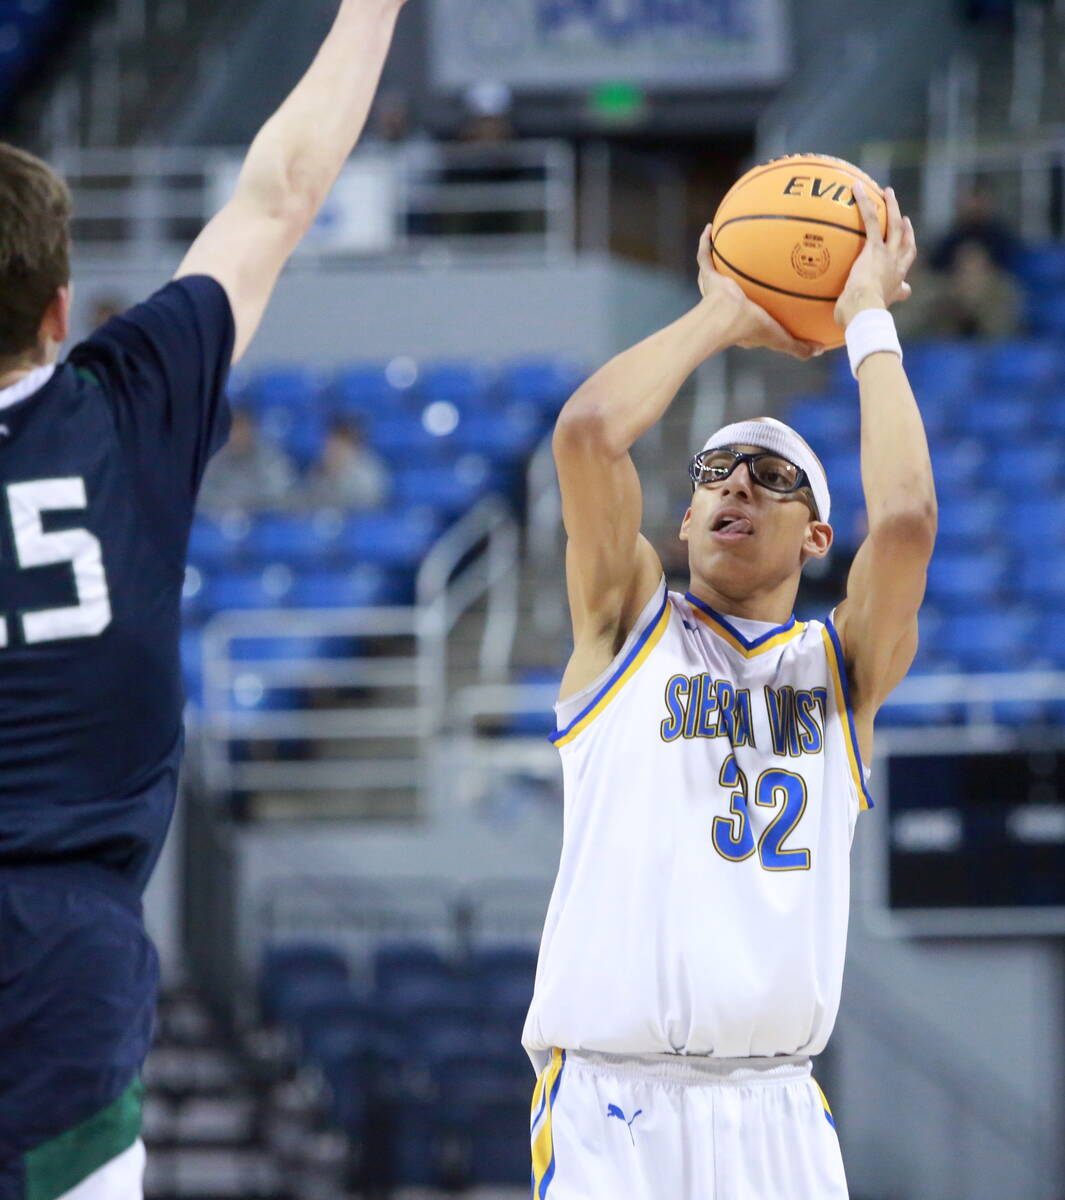 Sierra Vista junior Xavion Staton steps out for a 3-pointer during the Class 4A state champions ...